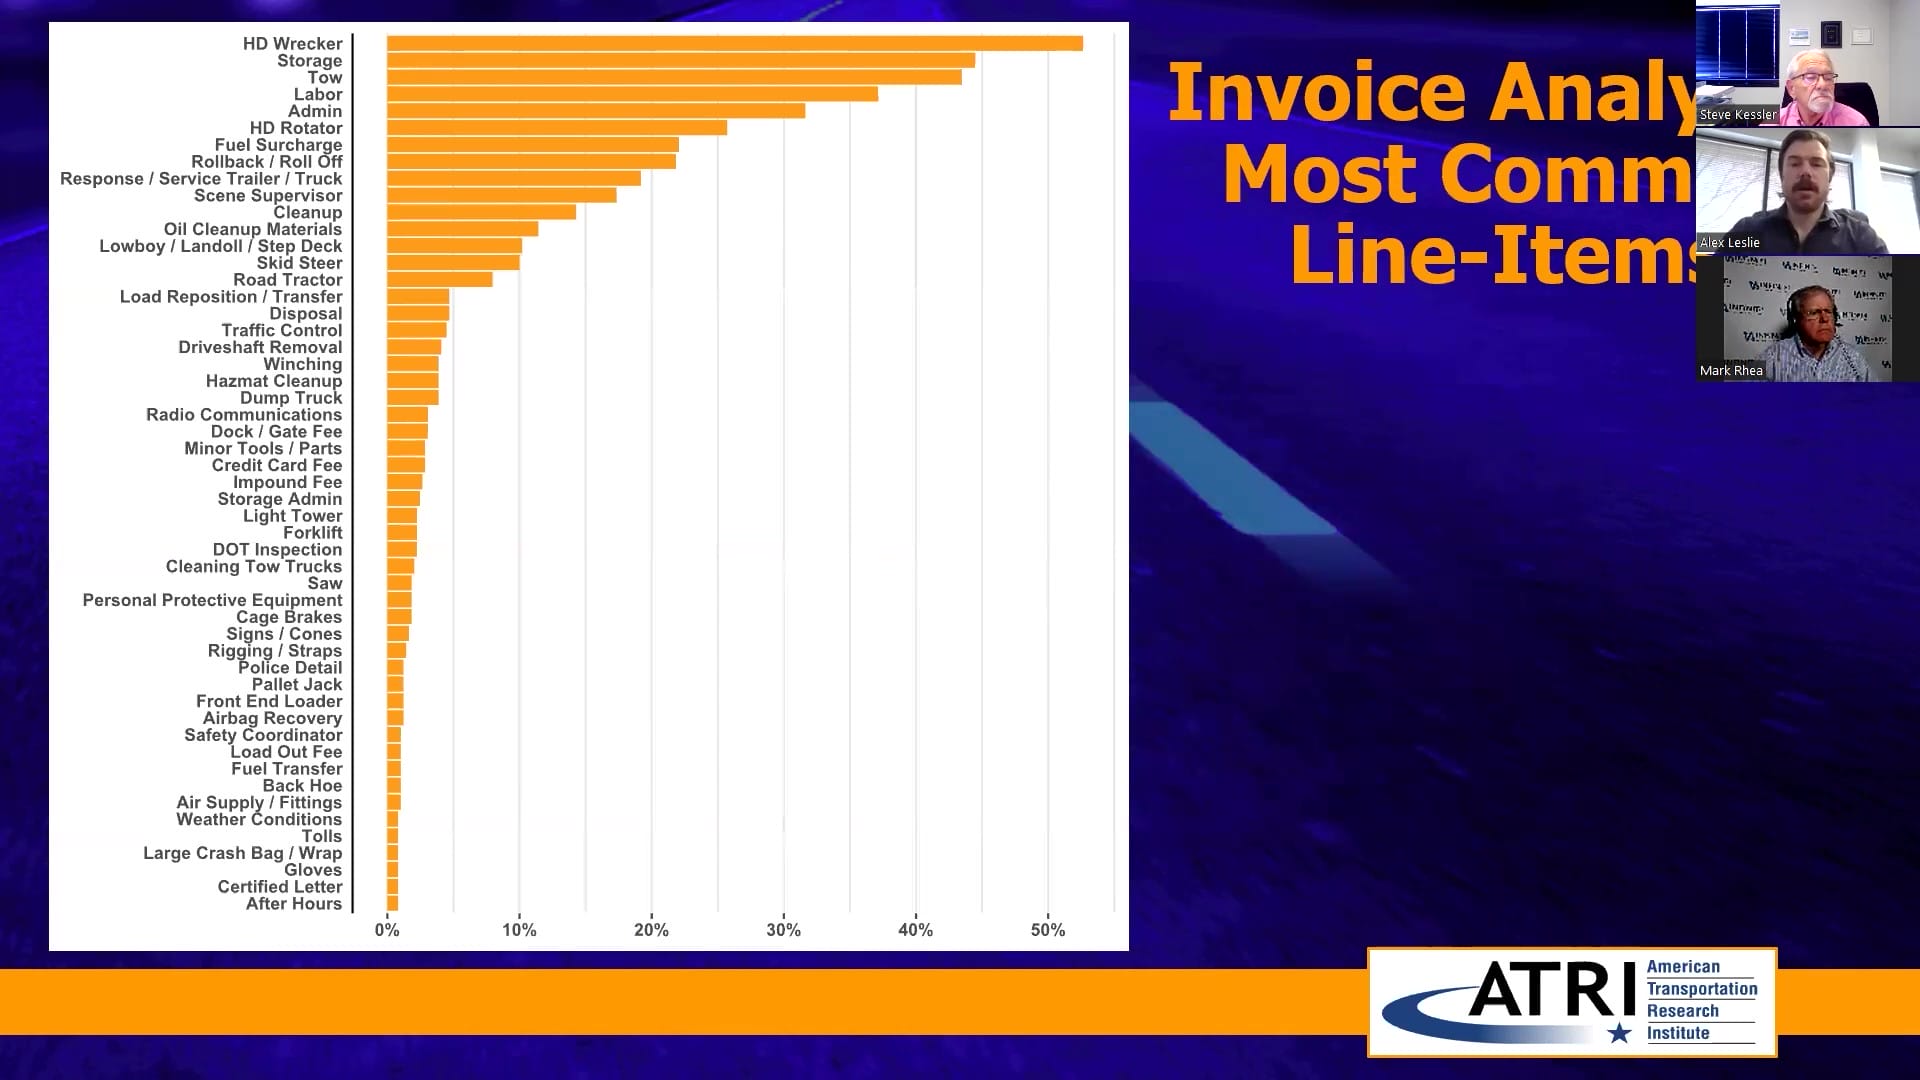 ATRI’s Research on Predatory Towing Invoice Analysis Most Common Line Items